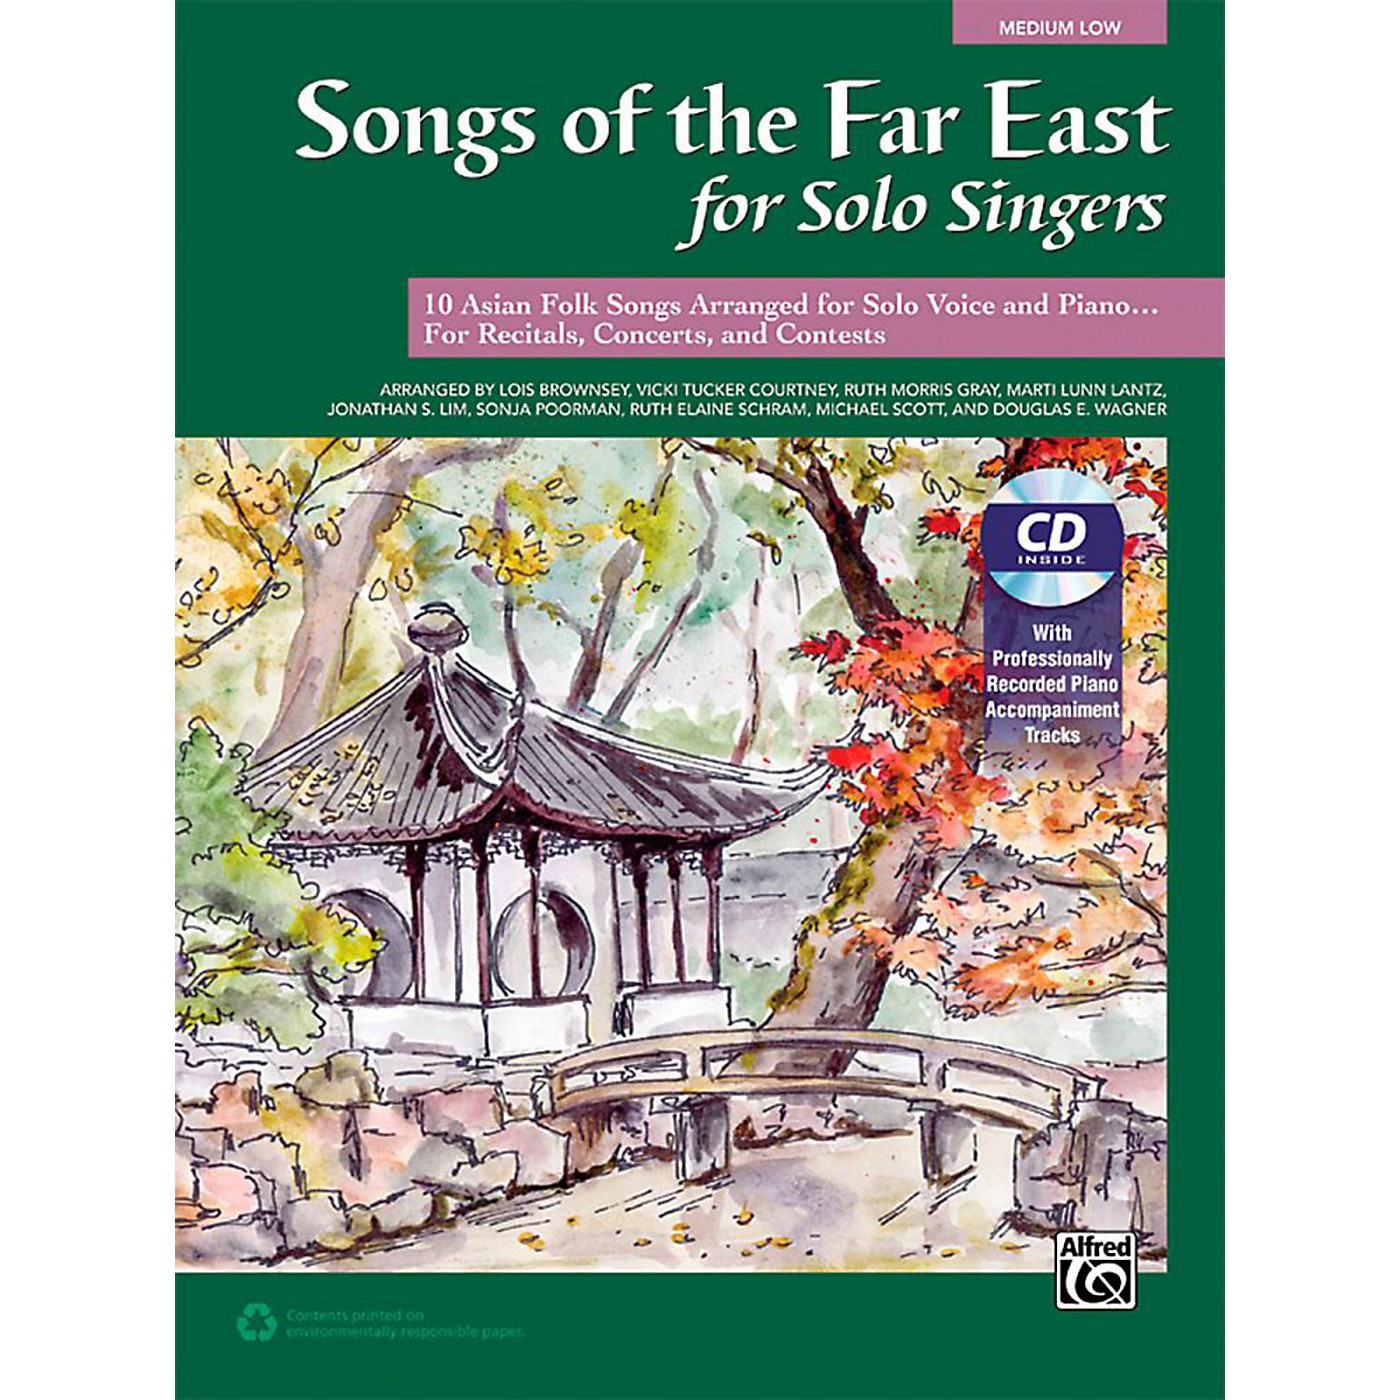 Alfred Songs of the Far East for Solo Singers Book & Acc. CD Medium Low thumbnail